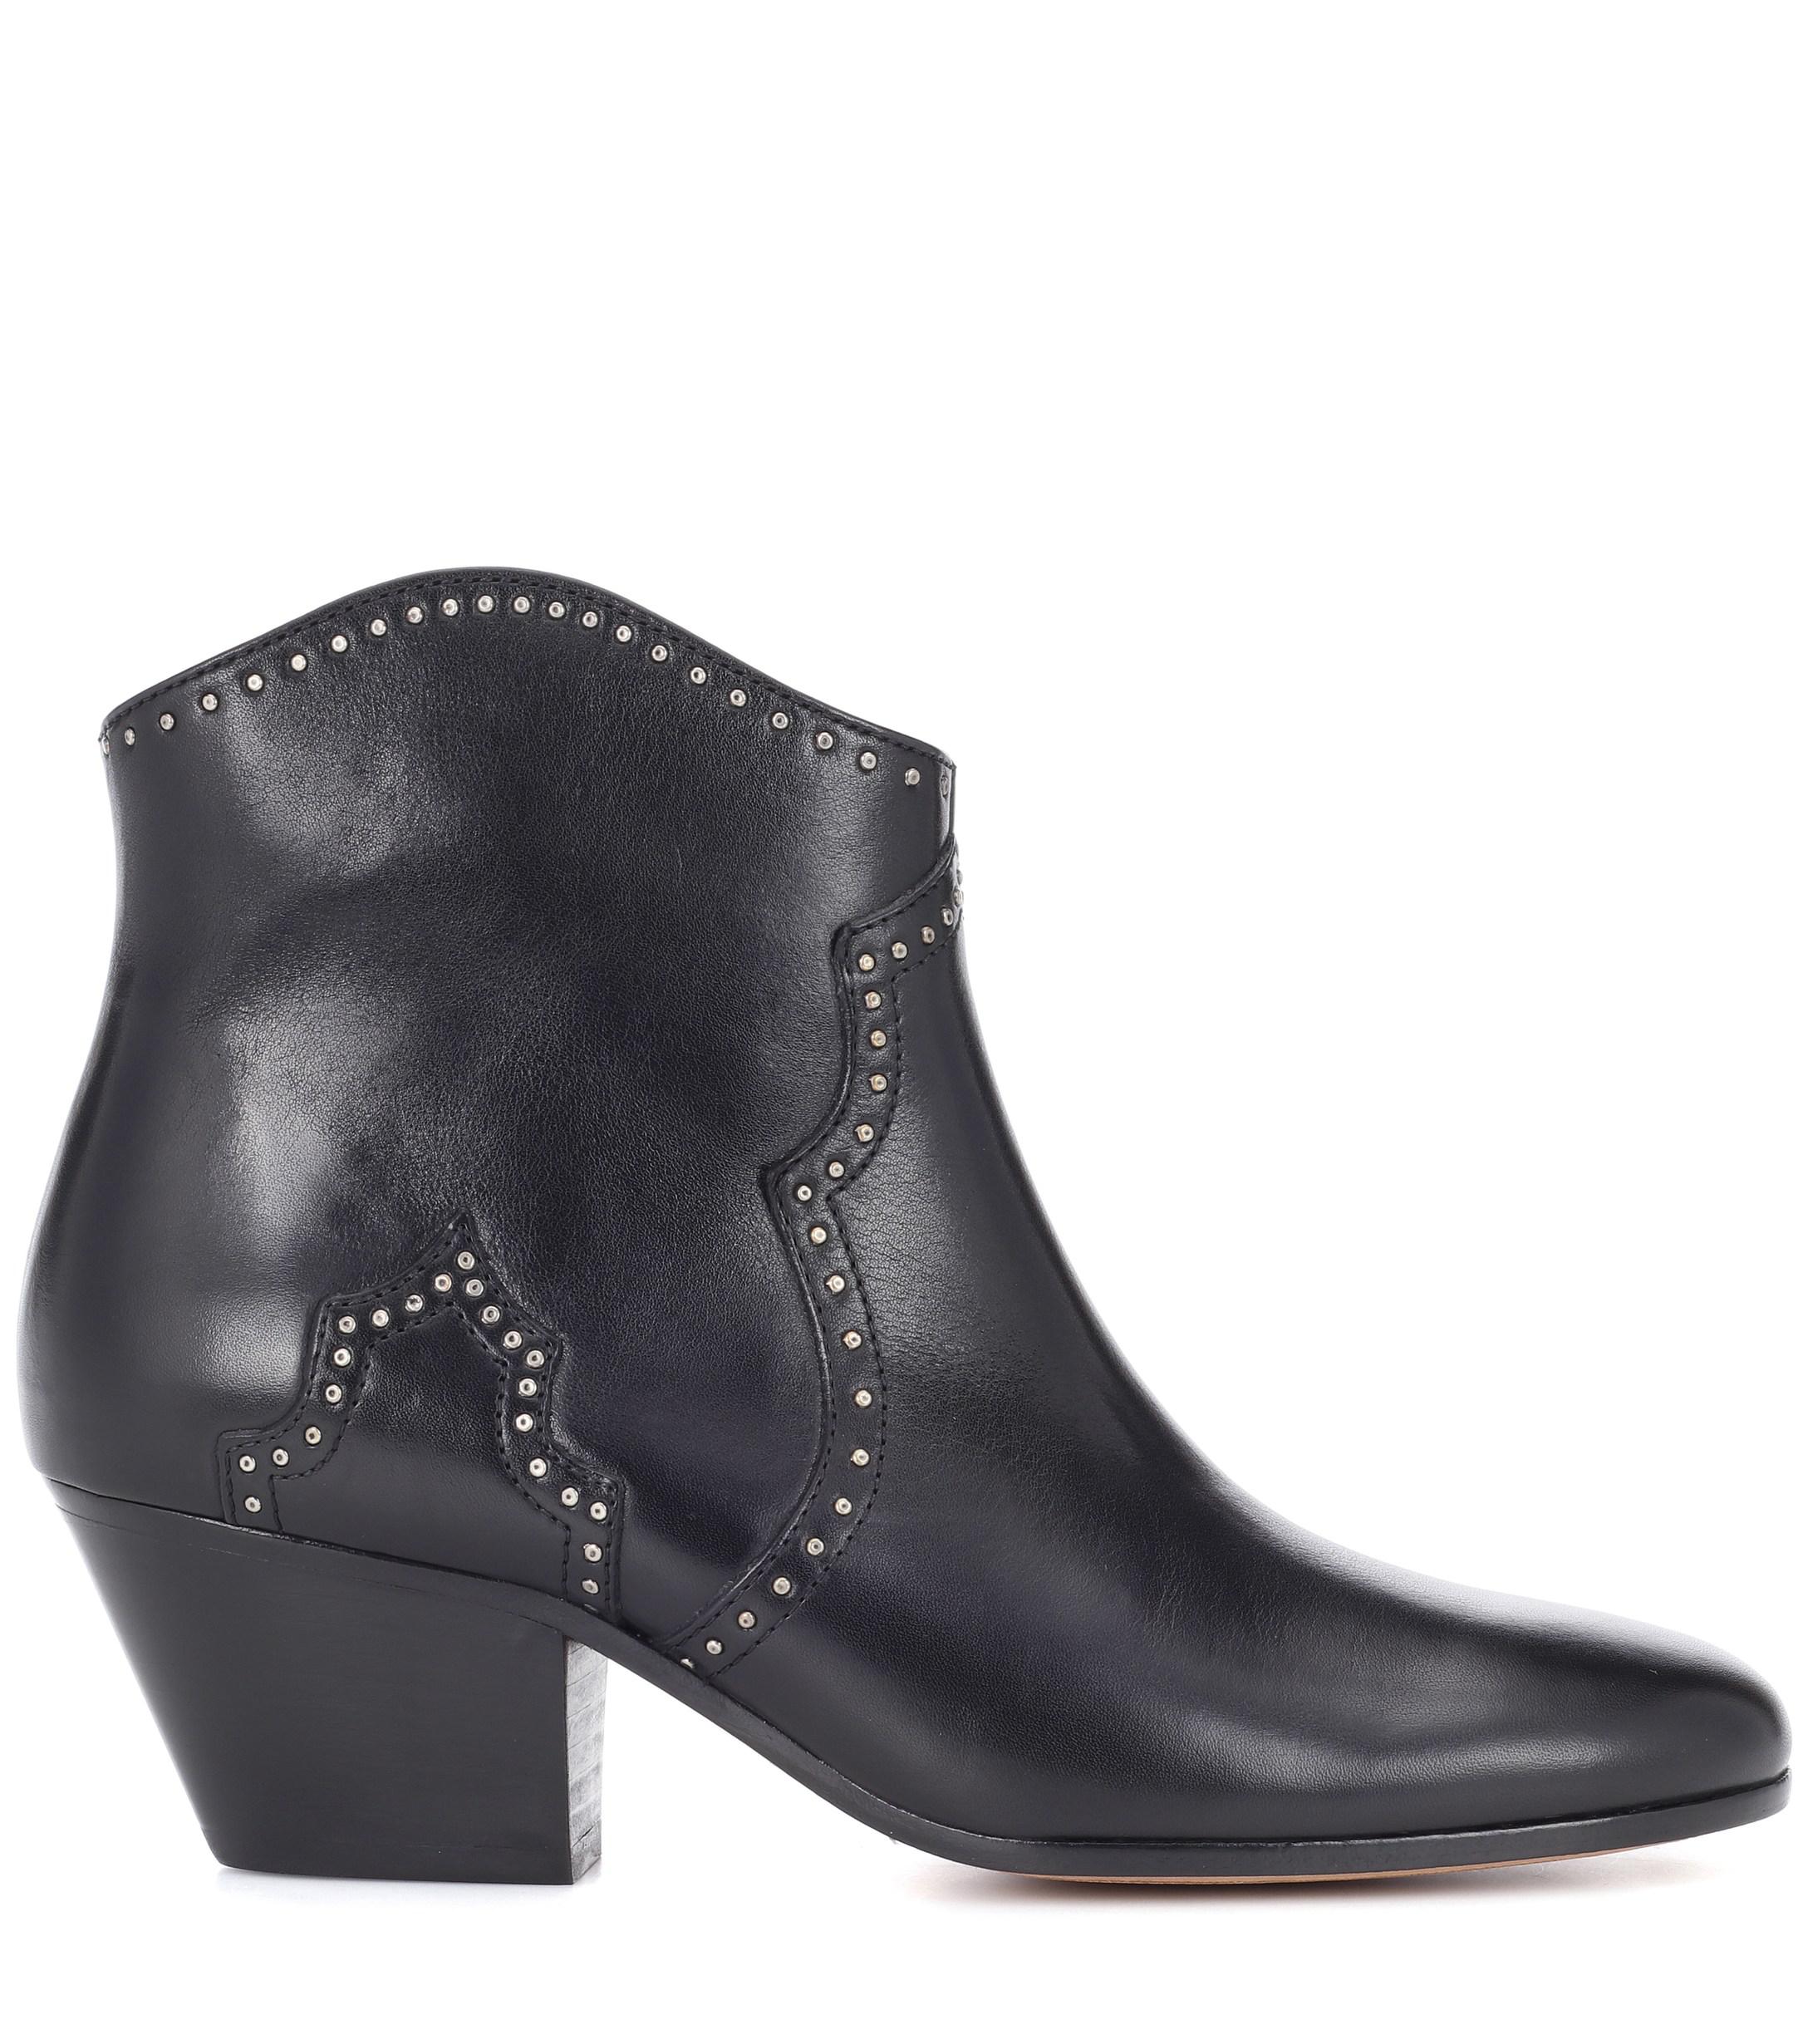 Isabel Marant Dicker Leather Ankle Boots in Black - Lyst